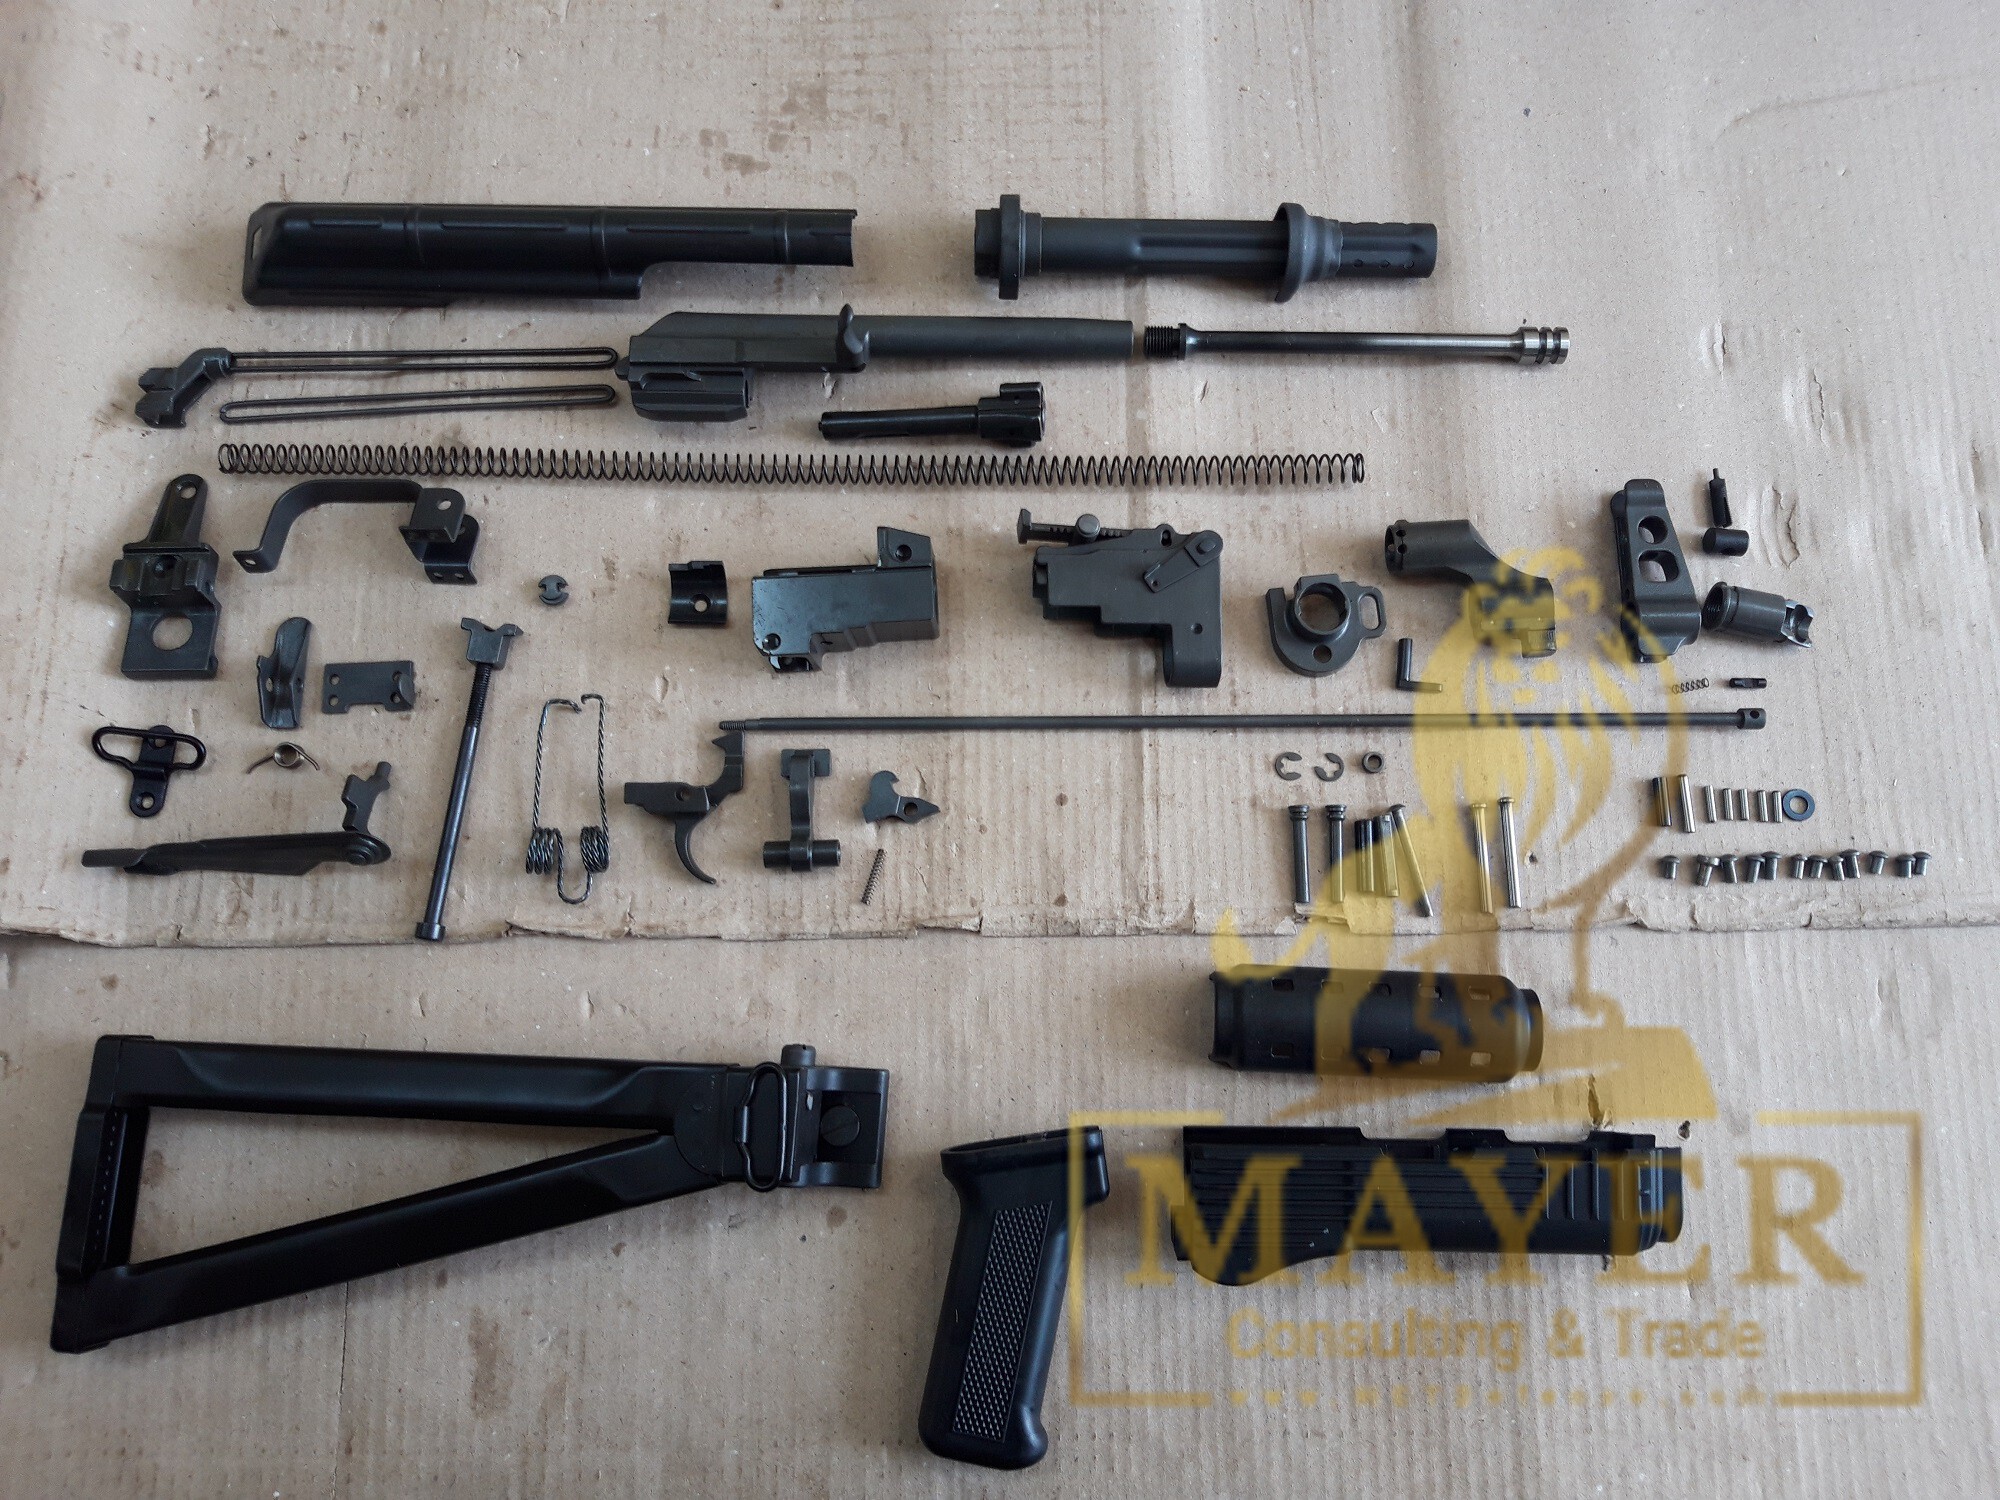 AK Parts Kits From New Production